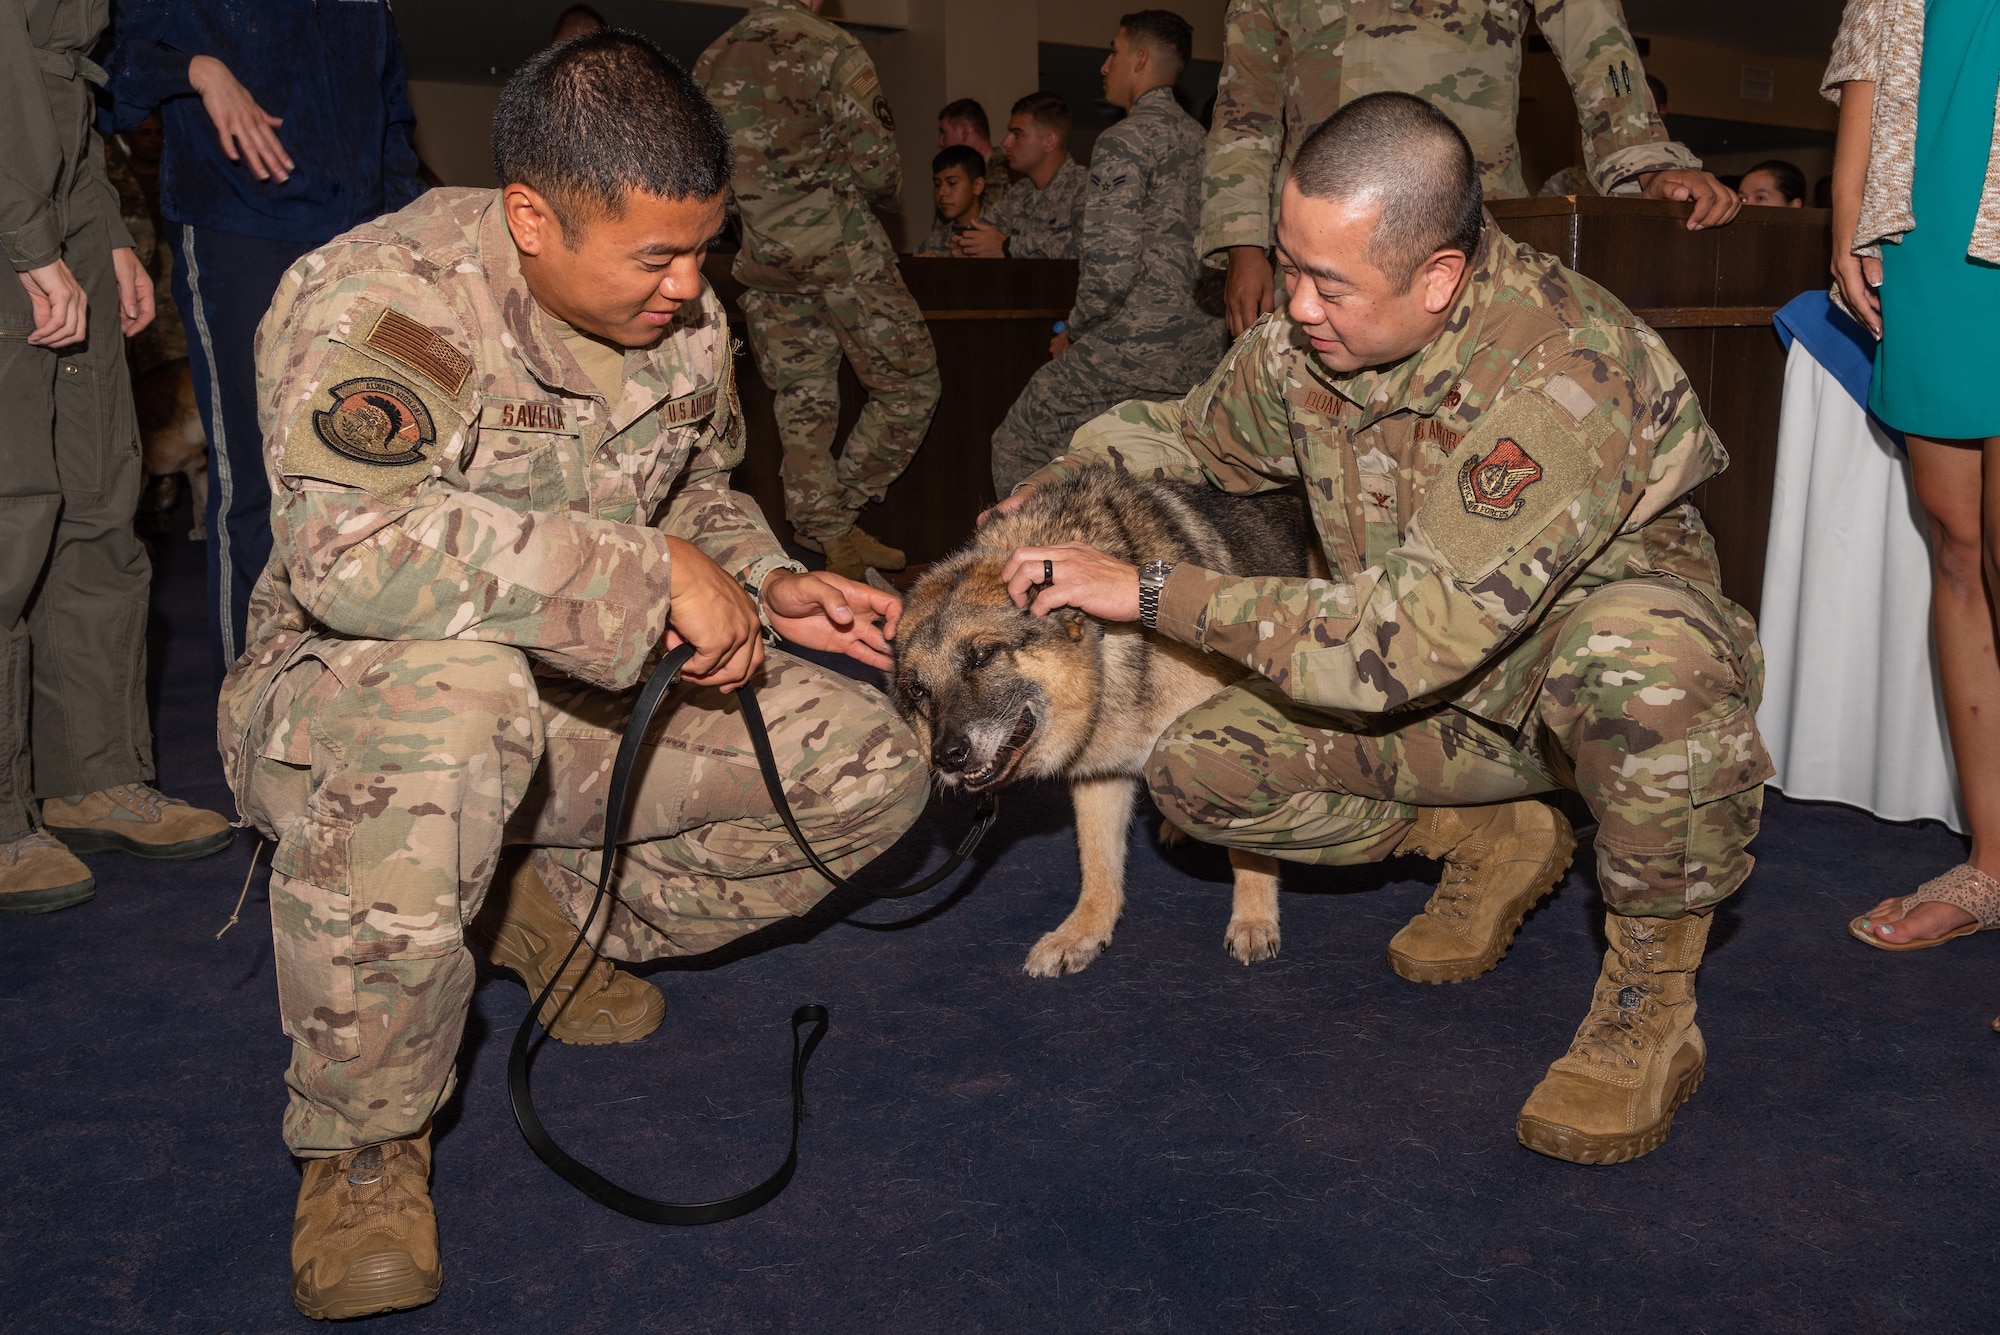 U.S. Air Force Staff Sgt. Bryan Savella, military working dog (MWD) handler assigned to the 18th Security Forces Squadron, and U.S. Air Force Colonel Thang Doan, commander assigned to the 18th Mission Support Group, pet MWD KitKat during a MWD retirement ceremony July 26, 2019, on Kadena Air Base, Japan. MWDs are trained in a variety of specialties, including detection of narcotic substances and improvised explosive devices, and capturing and detaining suspects. (U.S. Air Force photo by Senior Airman Cynthia Belío)